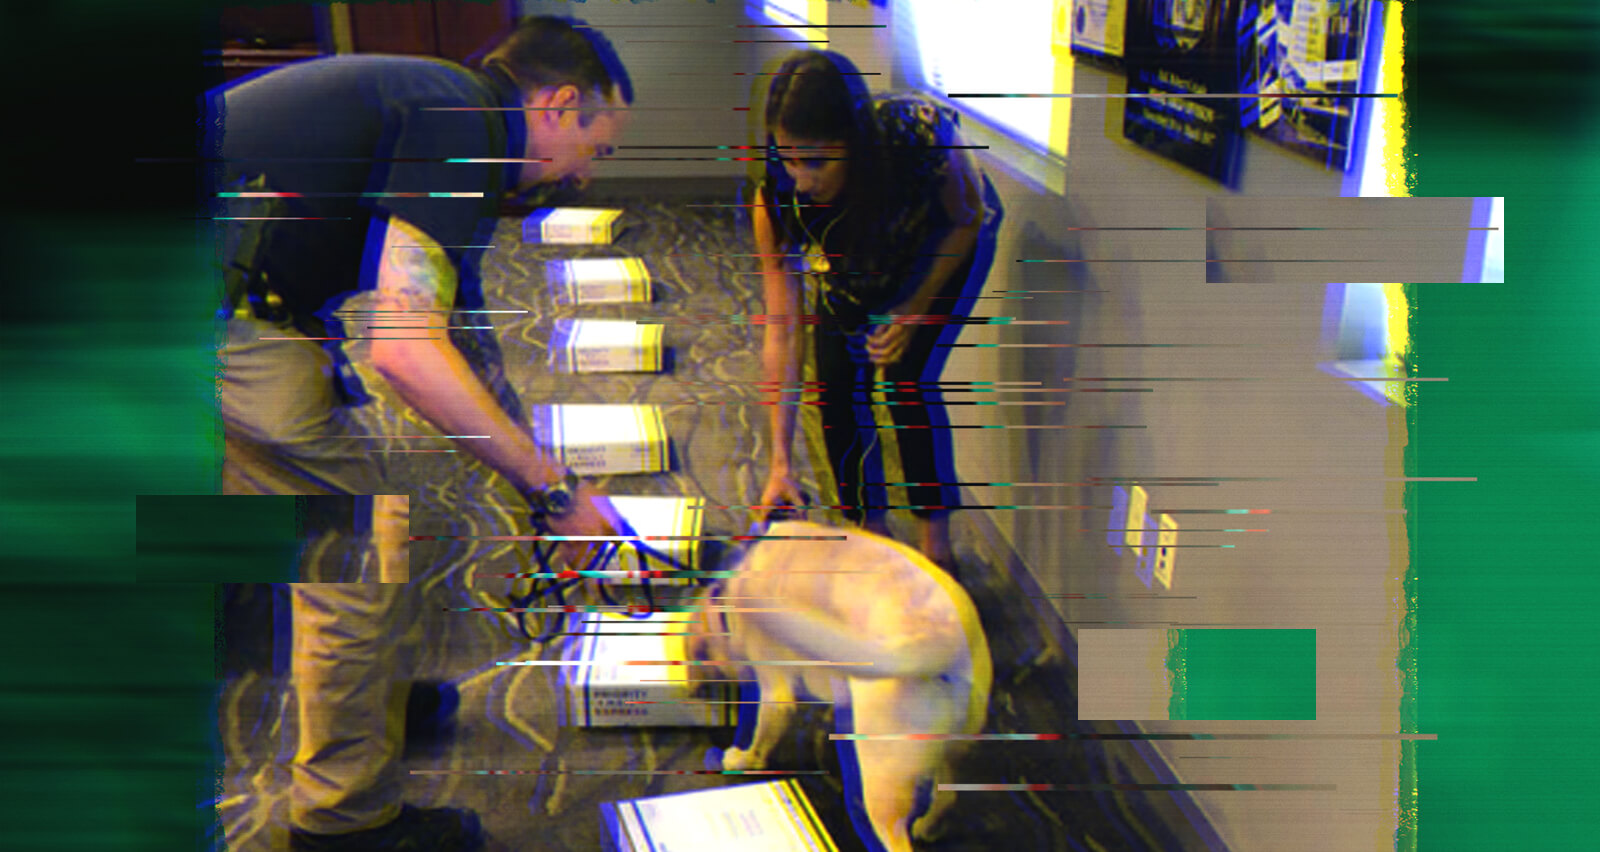 Things That Go Boom (Part 2) Featured Image - Bomb Sniffing Dog doing training with boxes.